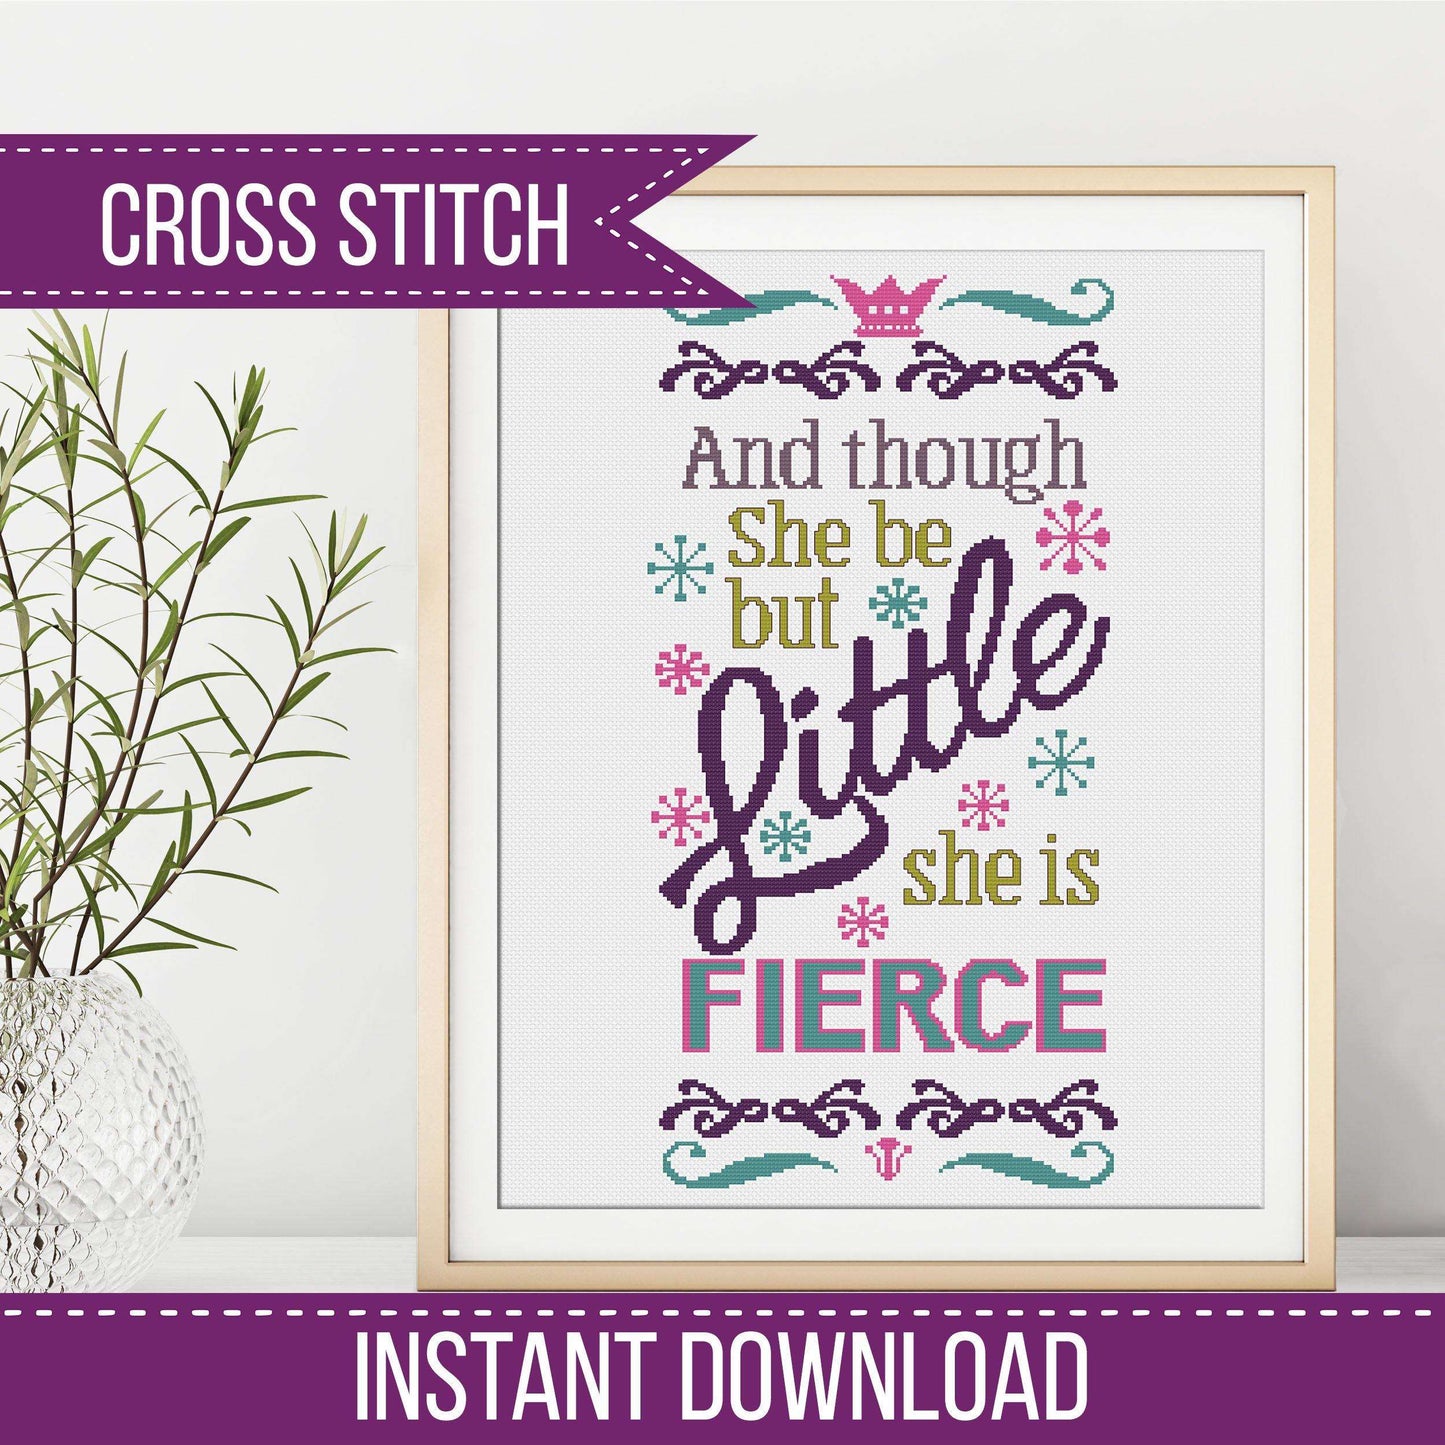 Though she be but little - Blackwork Patterns & Cross Stitch by Peppermint Purple